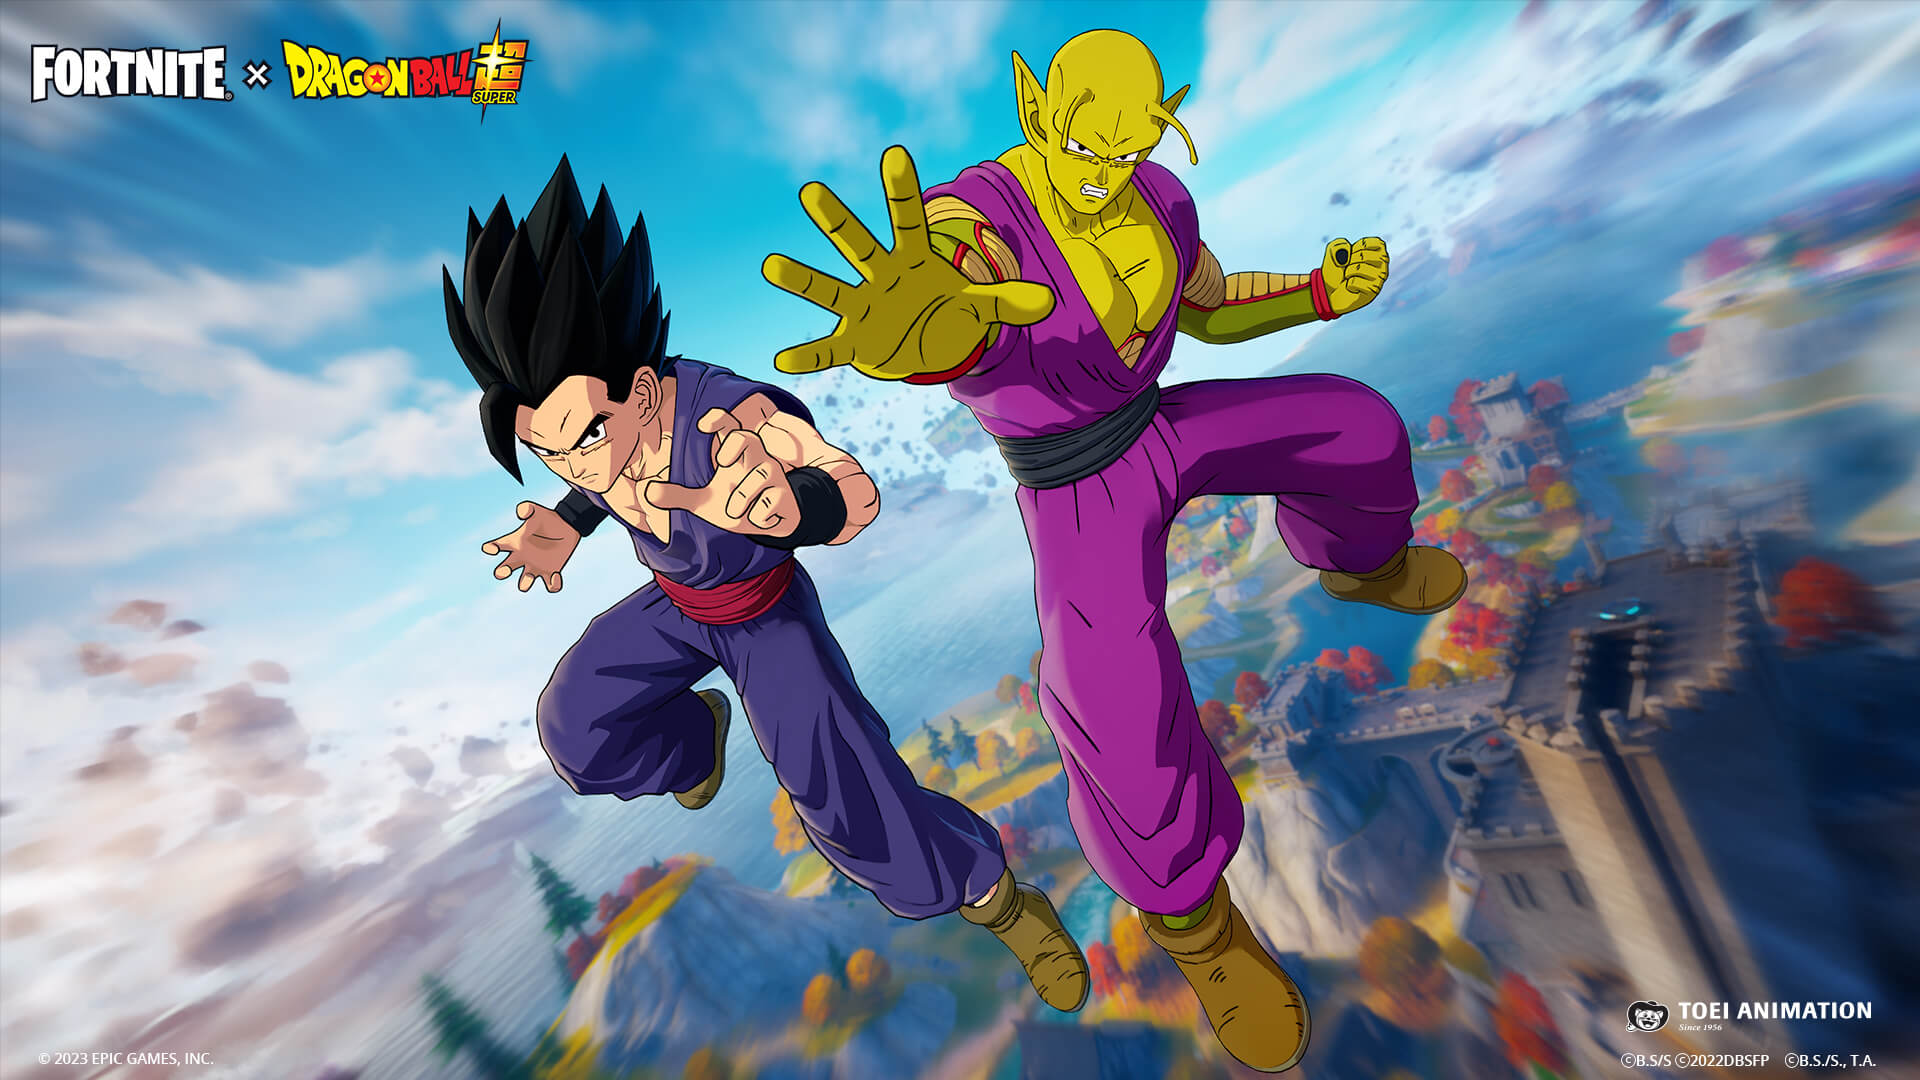 Fortnite adds Piccolo and Gohan, but not in their latest forms